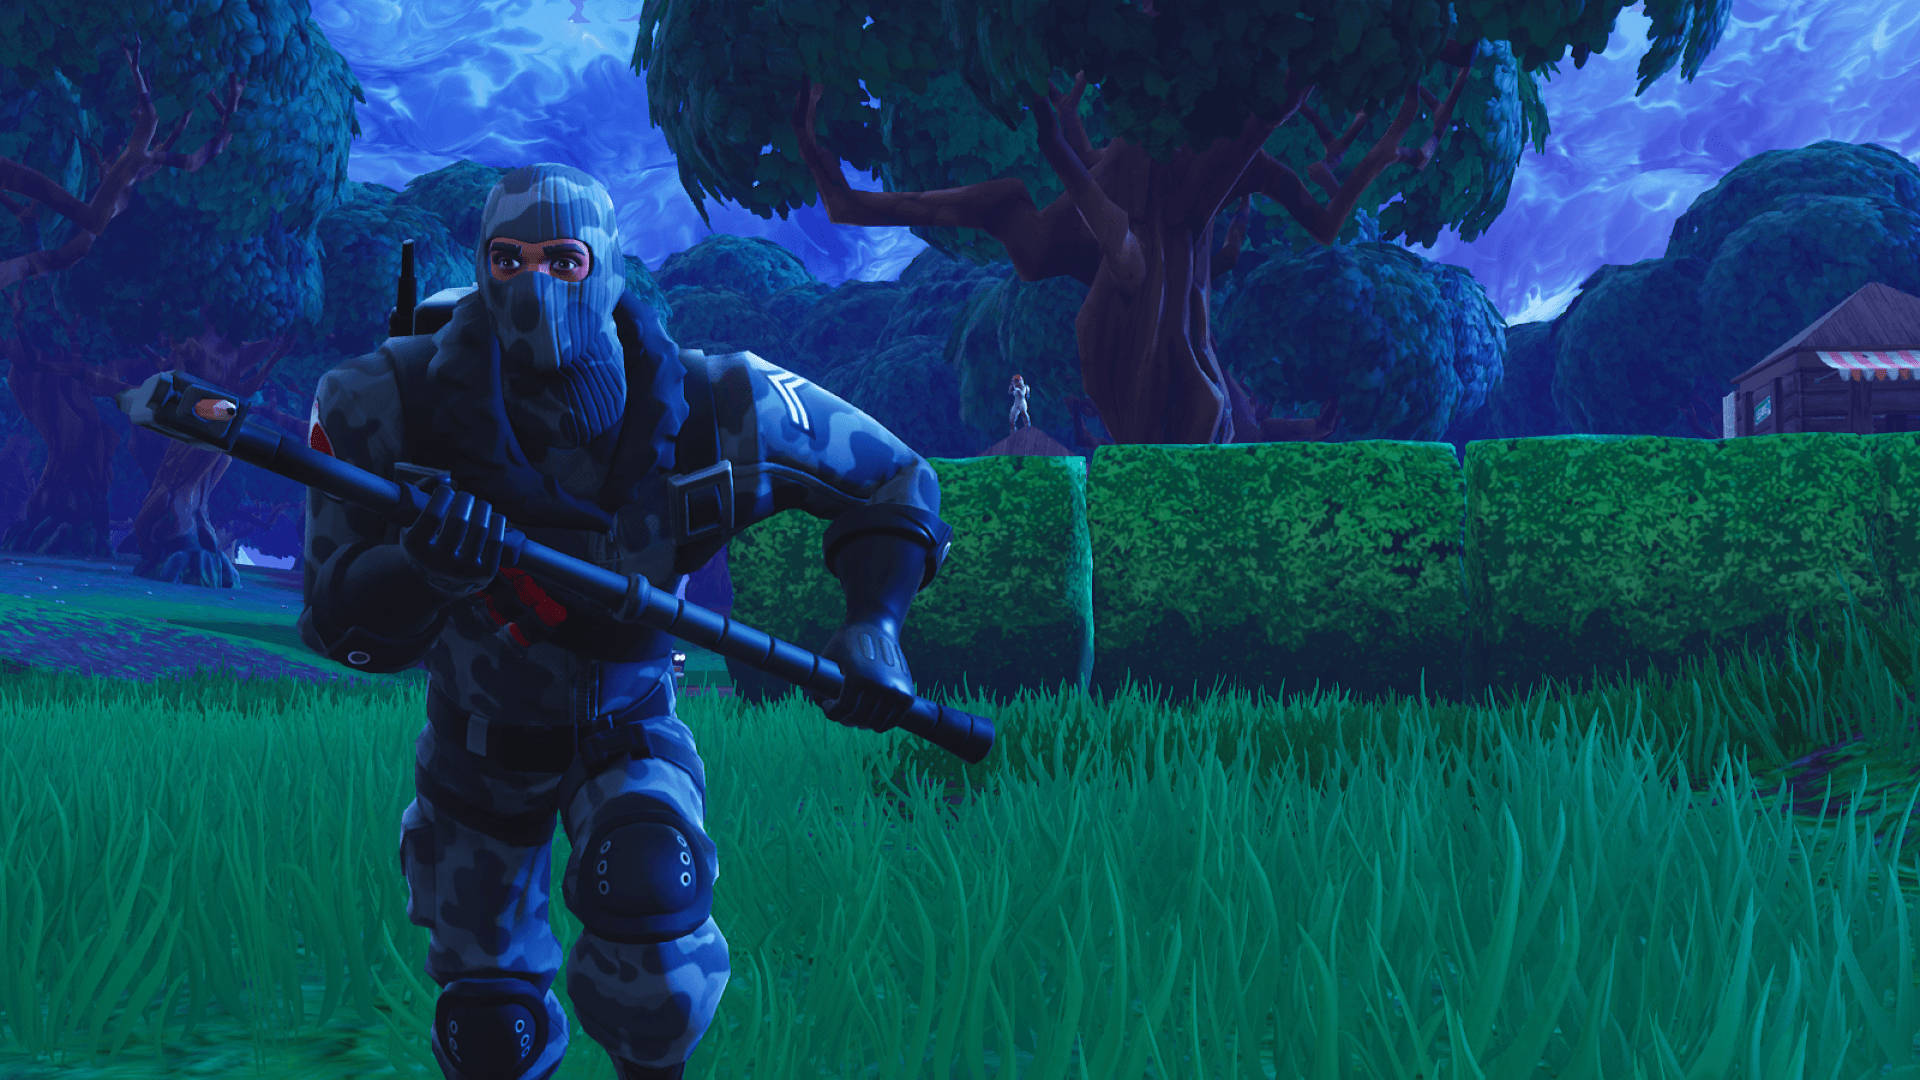 Havoc is running at night with a pickaxe in the game Fortnite HD wallpaper.